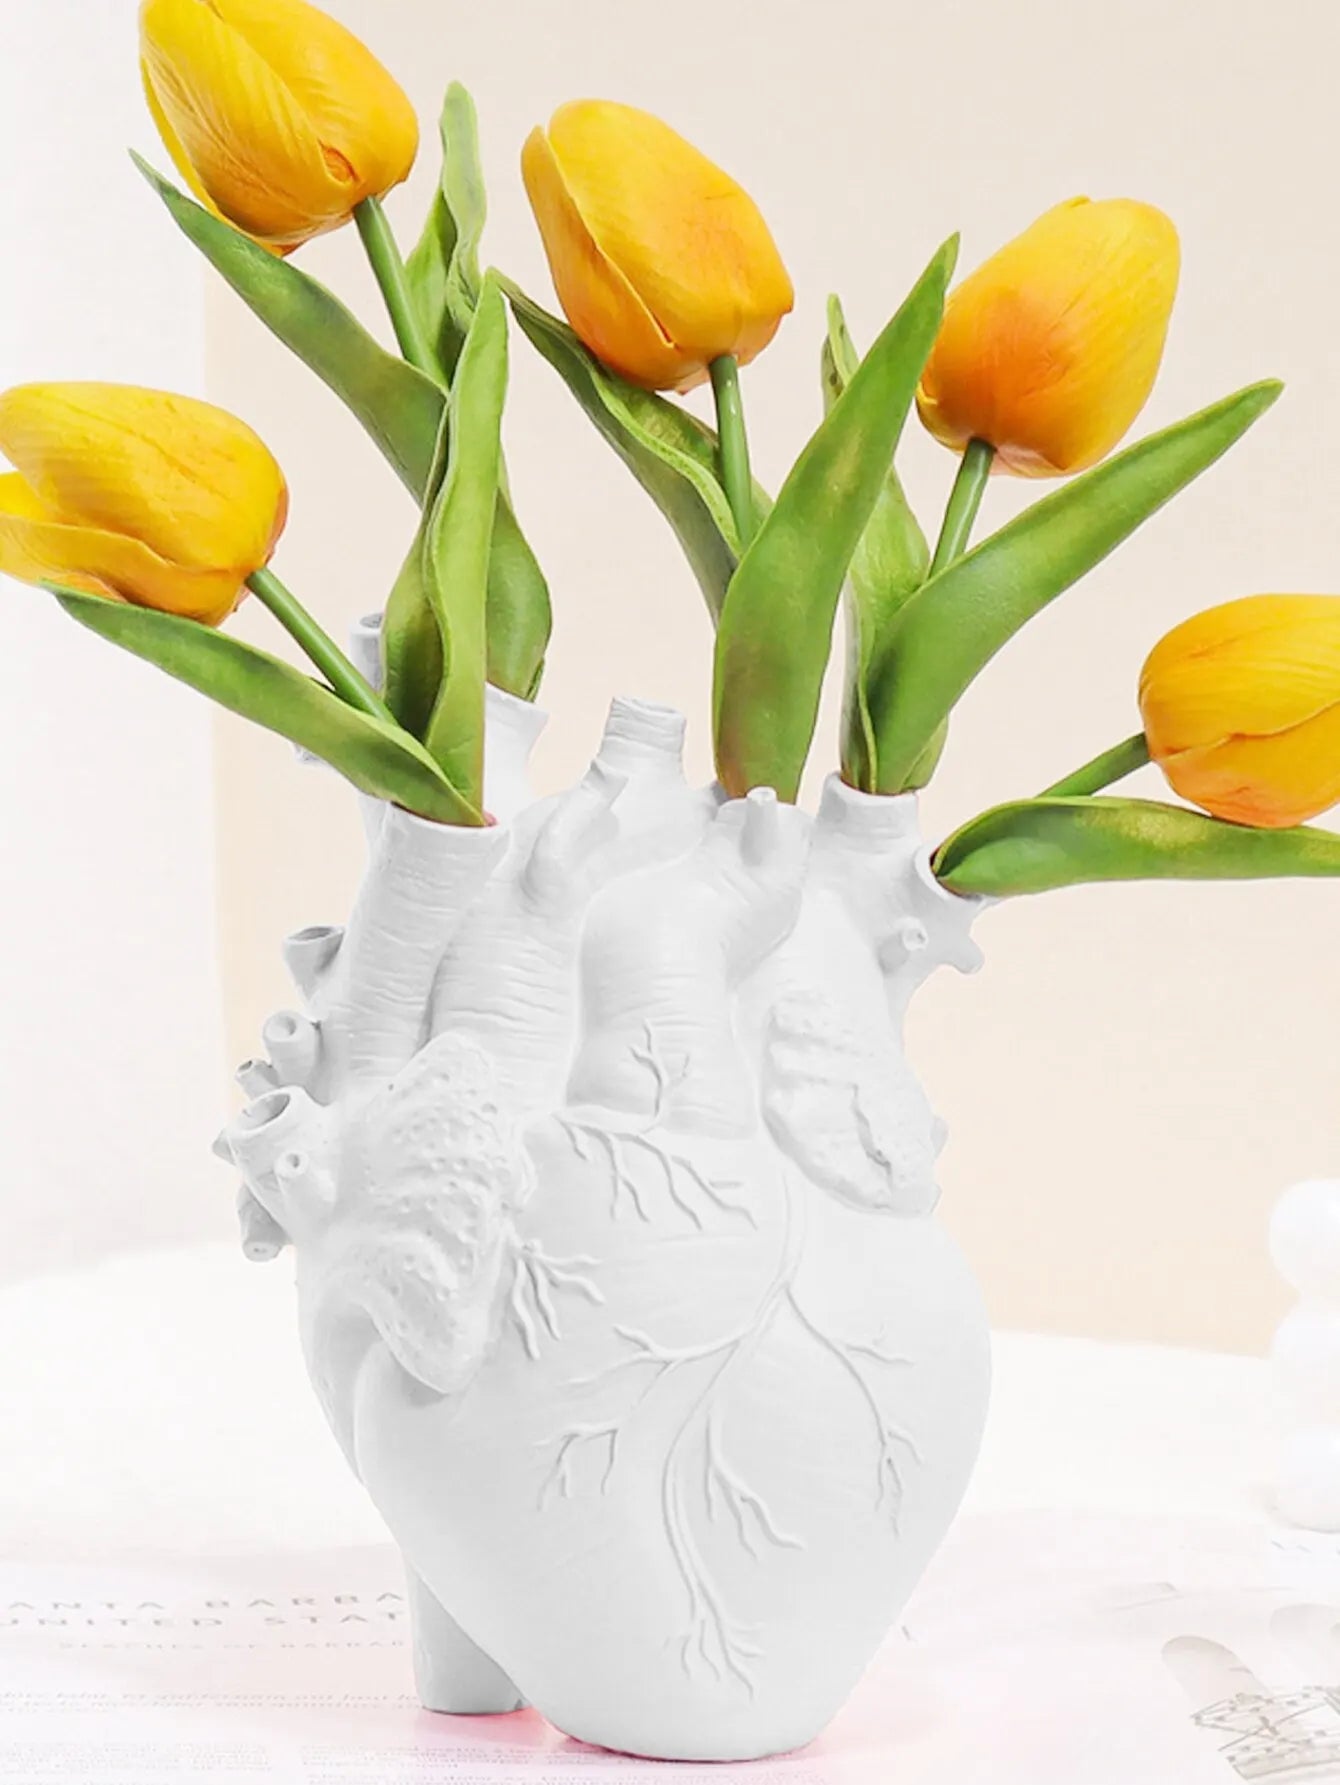 1pcs Nordic Halloween Heart Vase Resin Decorative Sample Room Table Top Living Room Vase Dining Table Dry Flower Insert acacuss